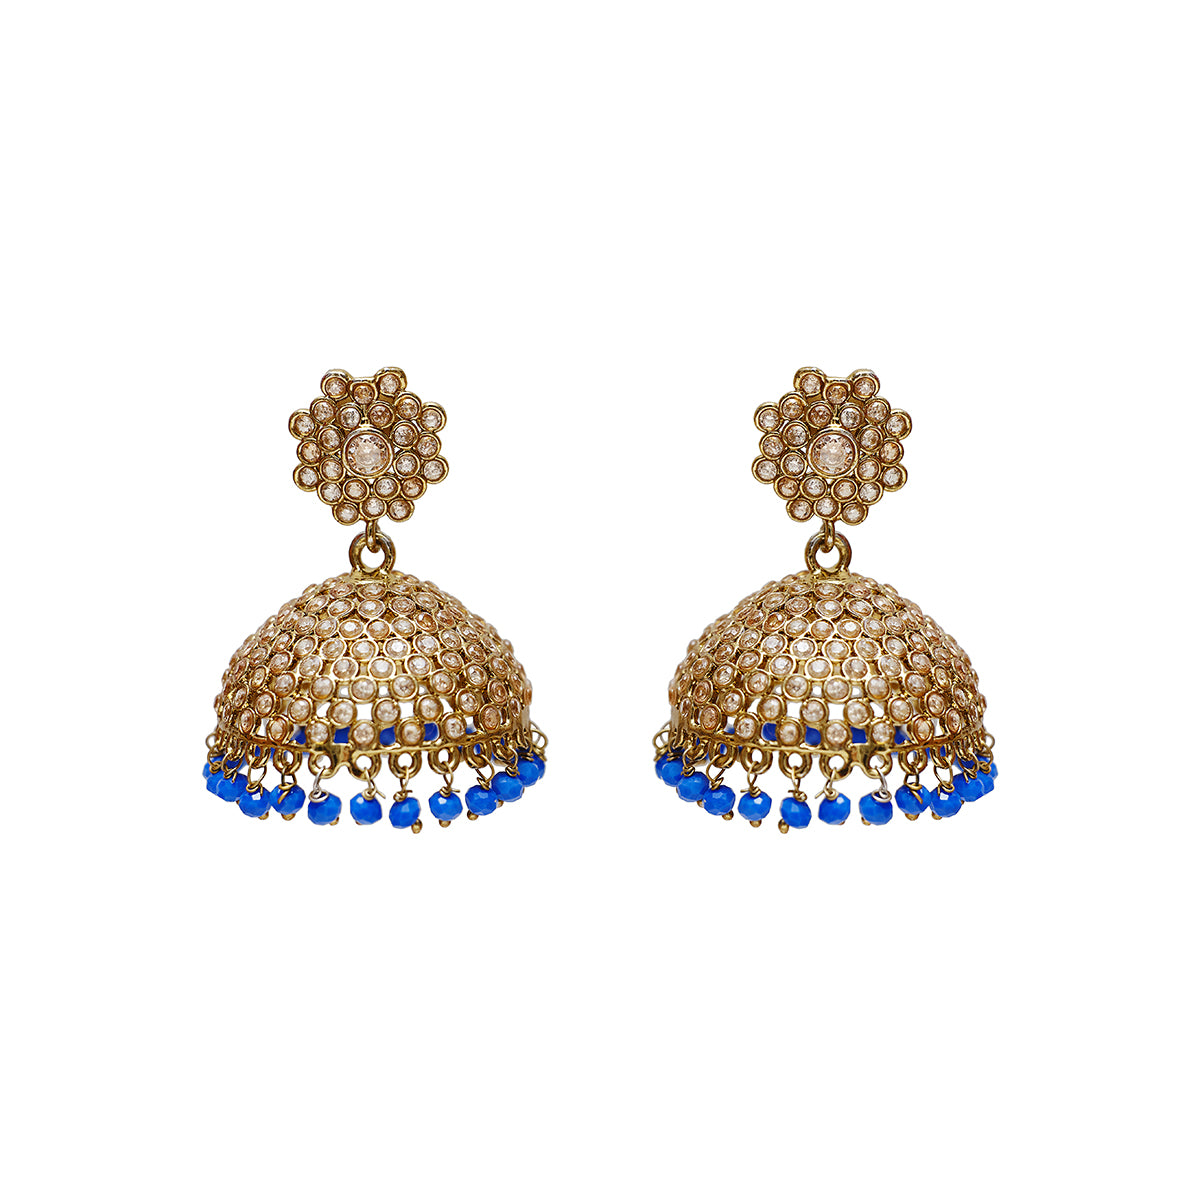 Gold and blue dome dangling earrings. As seen on editorials L'officiel, Vogue, Vogue Portugal. Kalpana hanging earrings  from Maheswary Collection by Veronica Tharmalingam